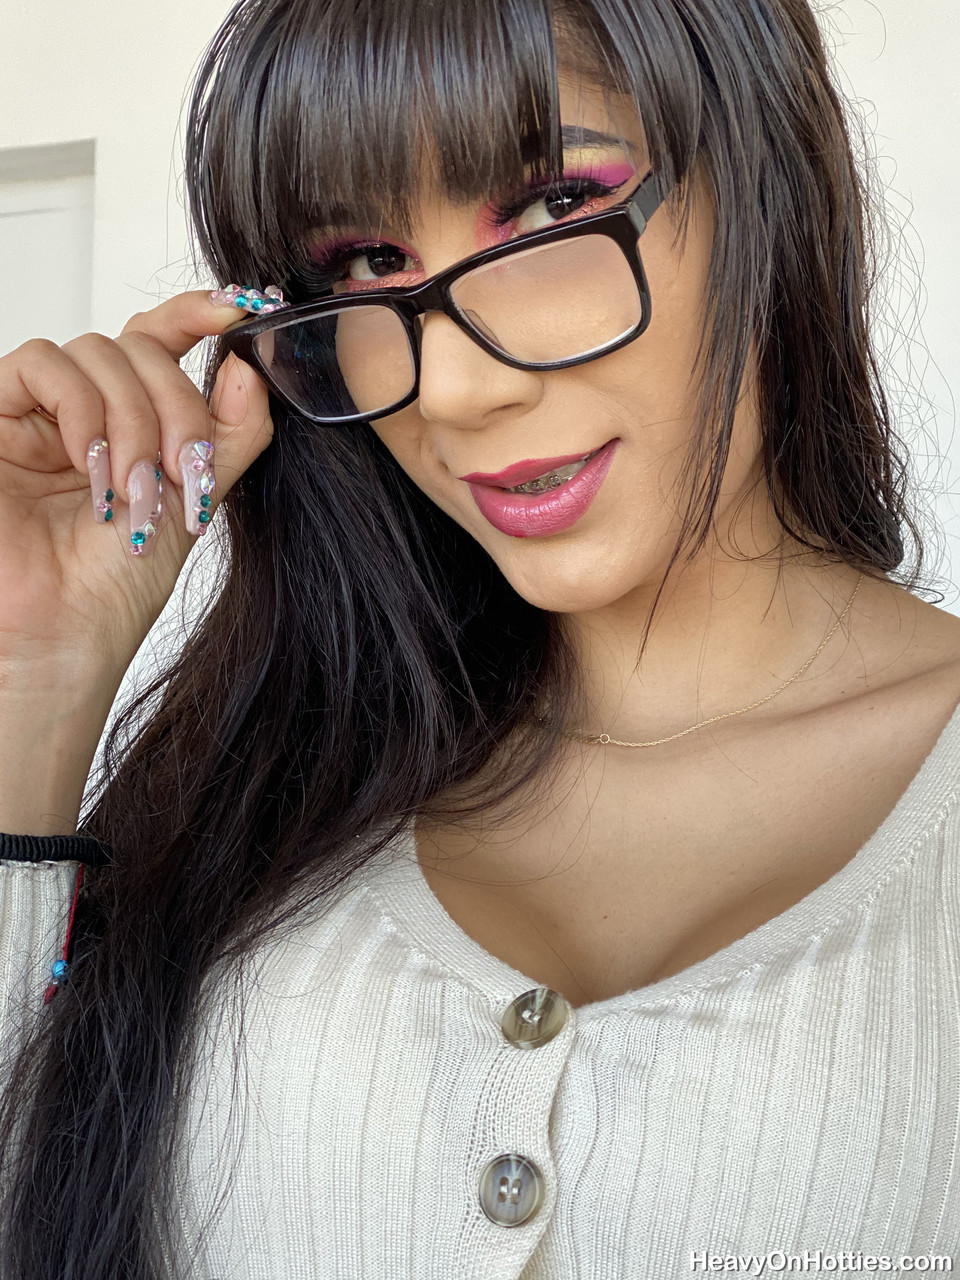 Sexy brunette Mia Marin strips to her shoes and glasses before POV action foto porno #424700857